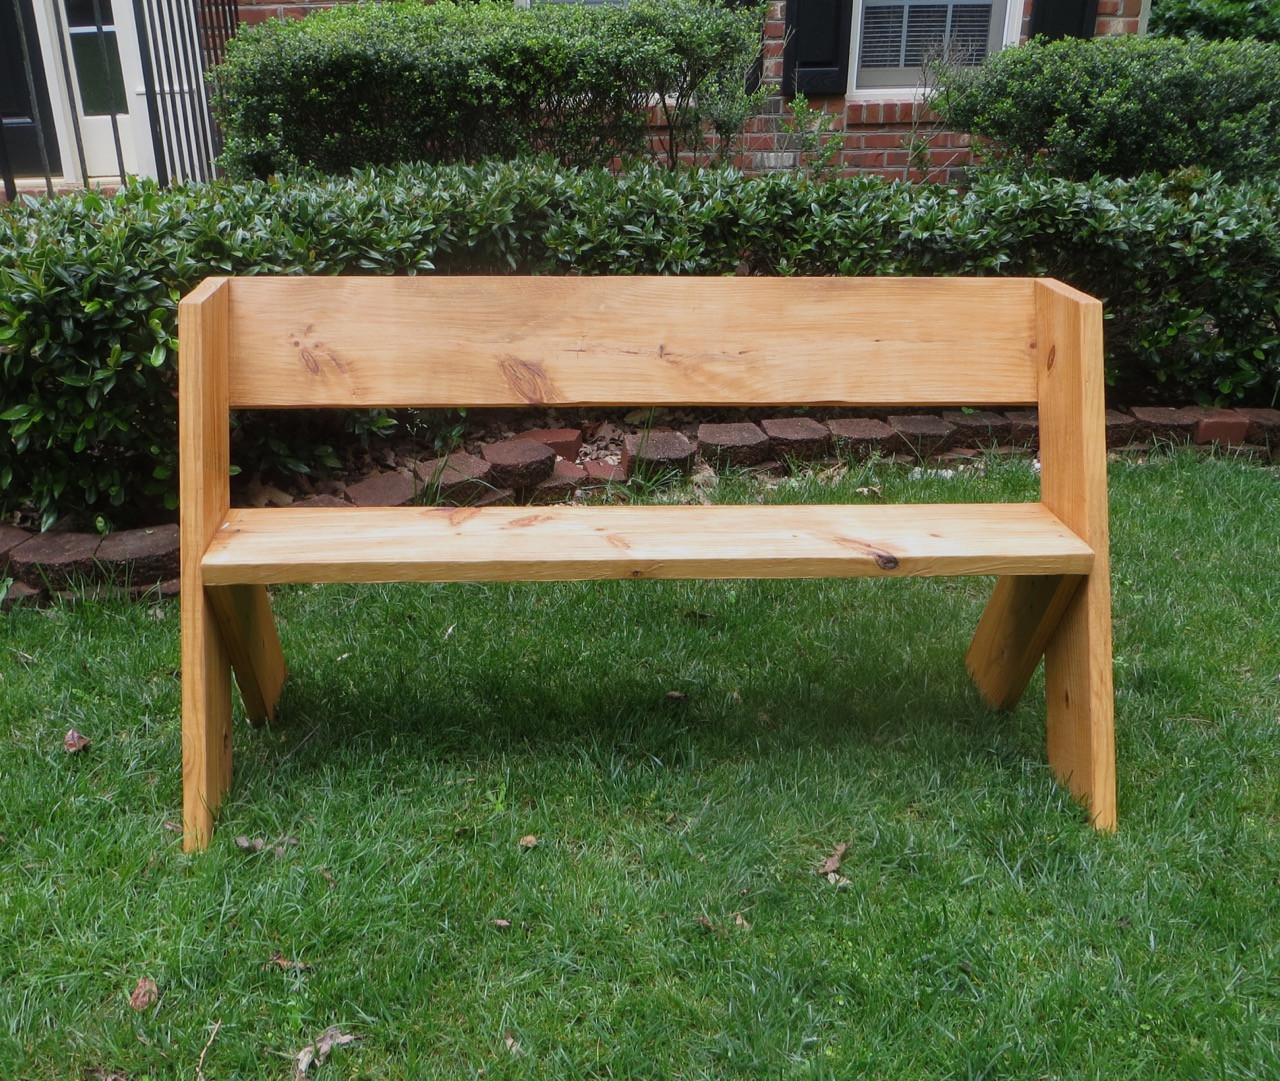 DIY Outdoor Wooden Bench
 The Project Lady DIY Tutorial – $16 Simple Outdoor Wood